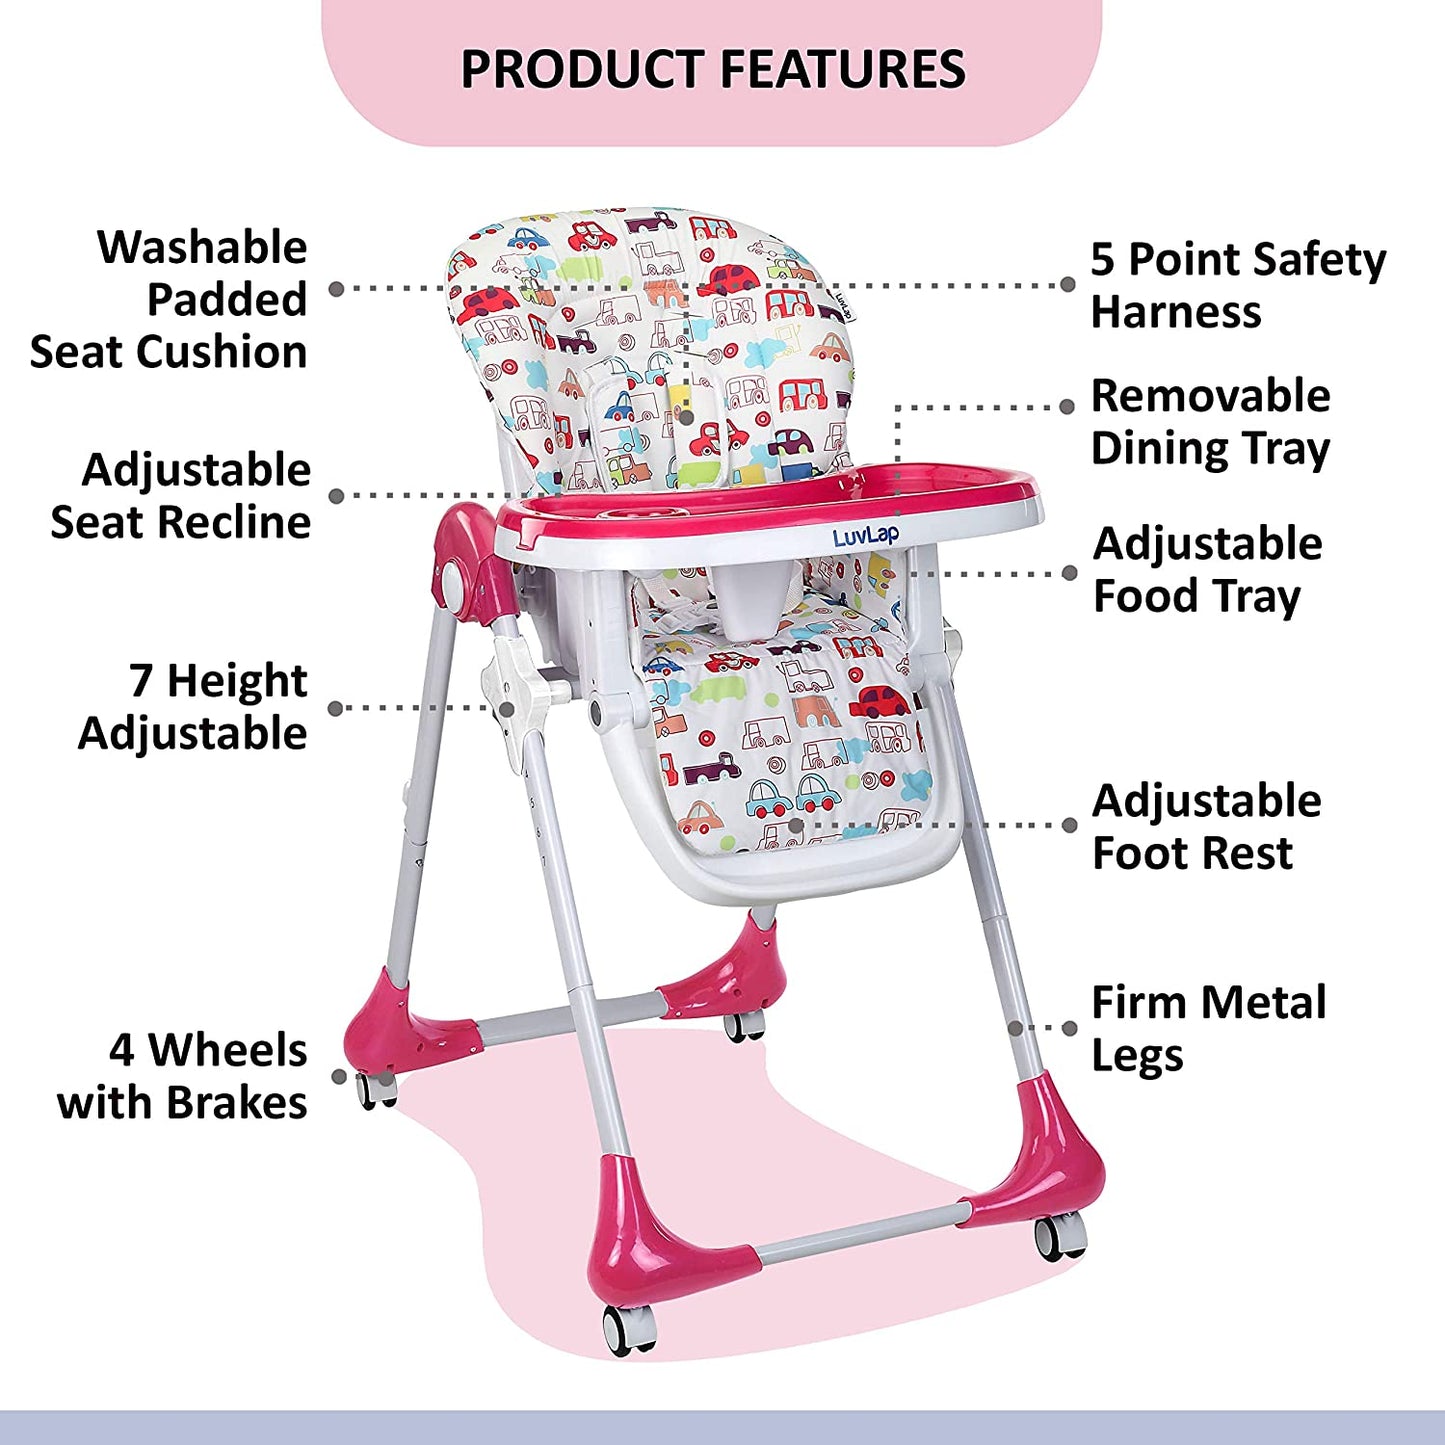 Royal High Chair with Adjustable 7 Heights with Wheels, for 6 to 36 Months Baby - Pink